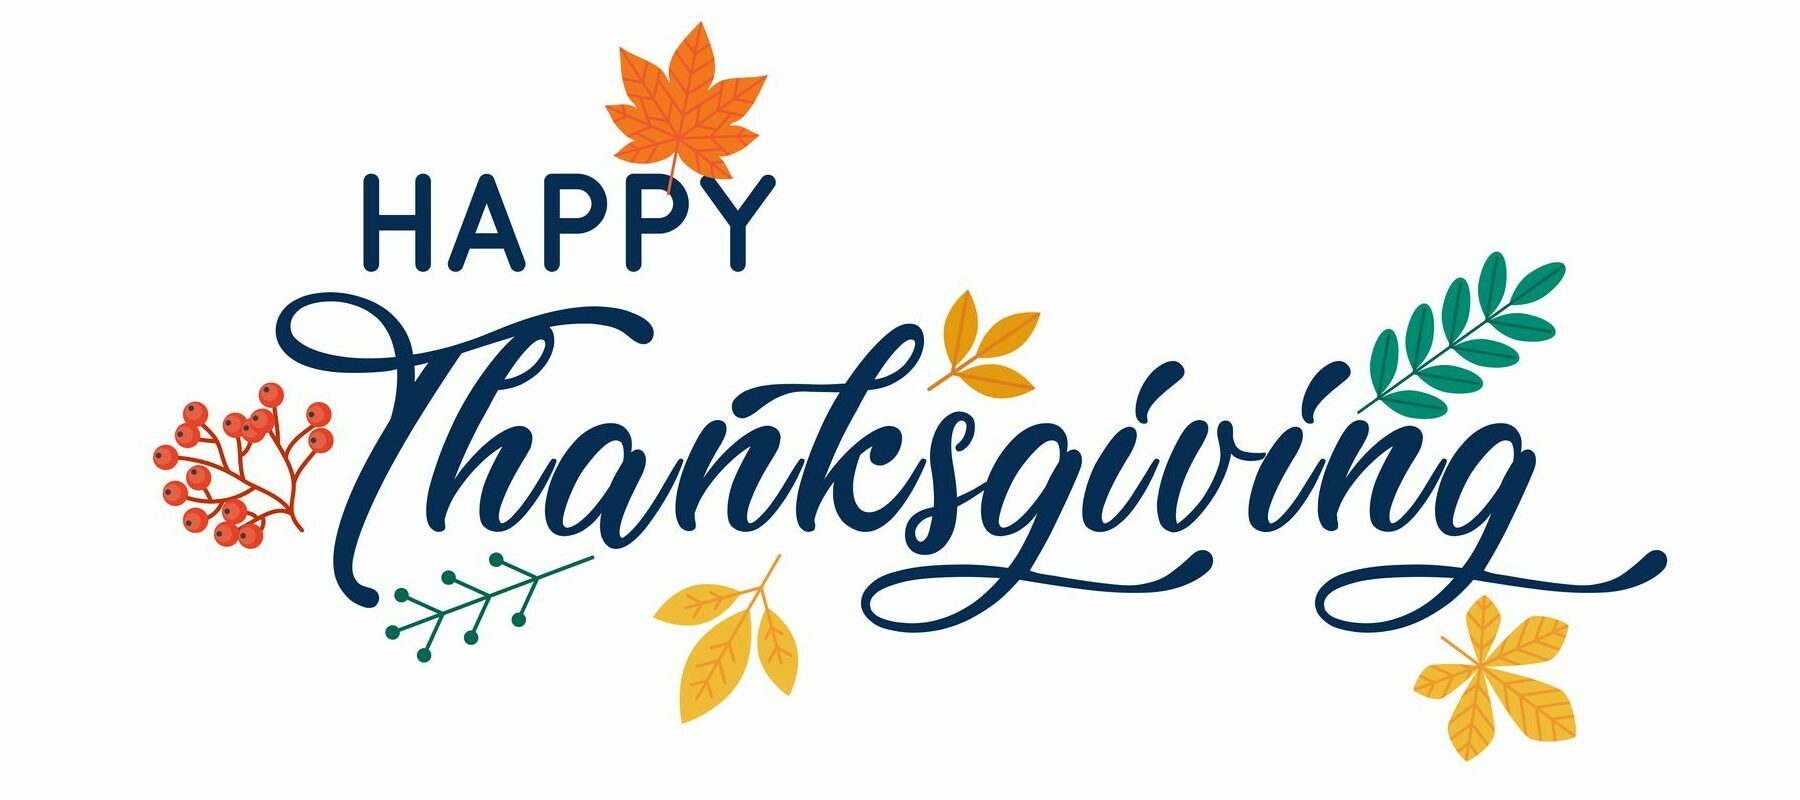 Cymulate's Community team wishes you all a Happy Thanksgiving! 